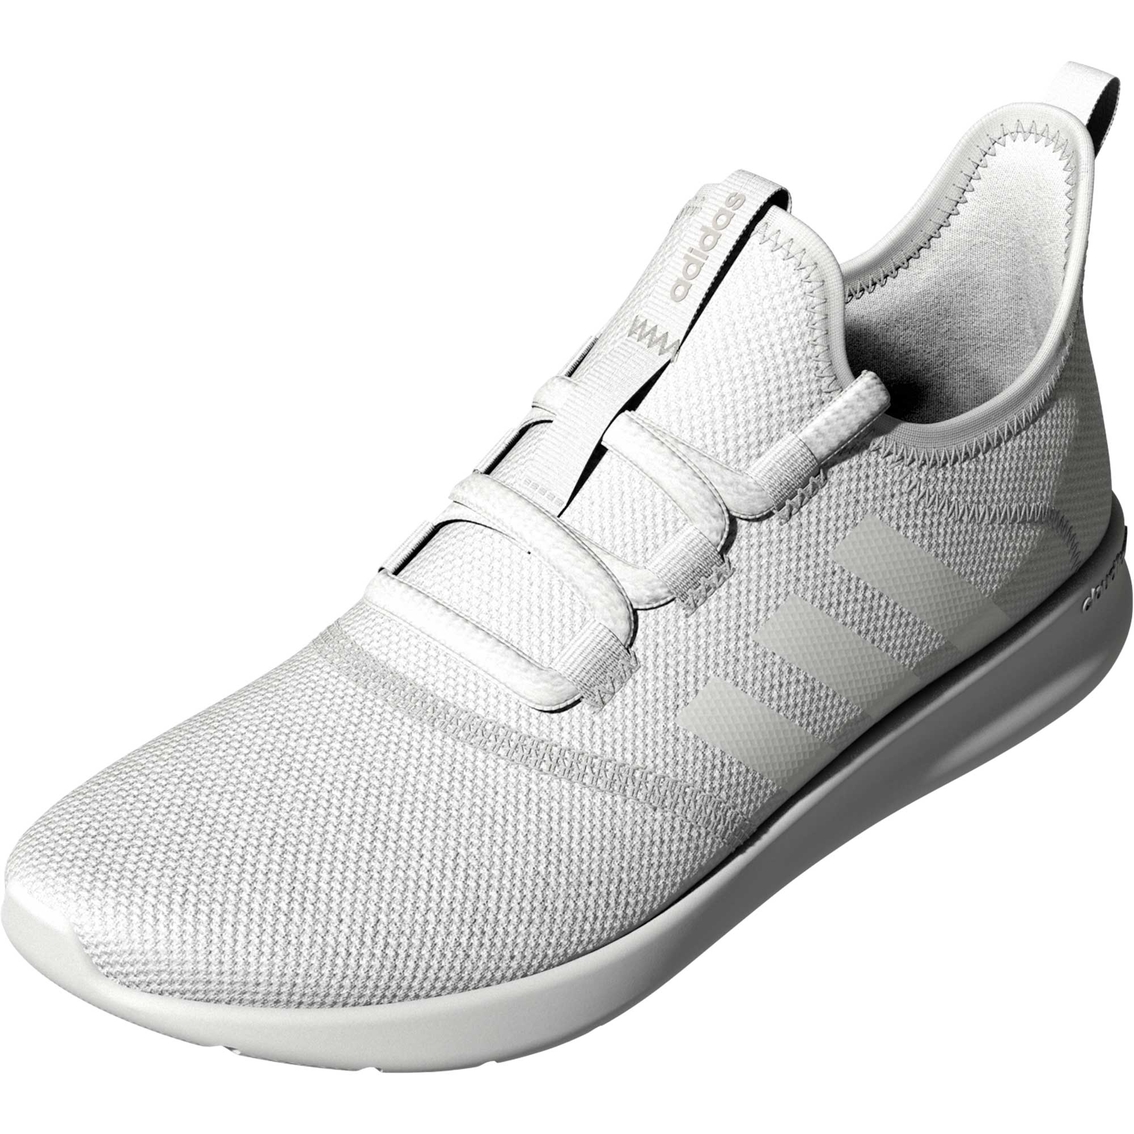 Adidas Women's Cloudfoam Pure 2.0 Sneakers - Image 9 of 10